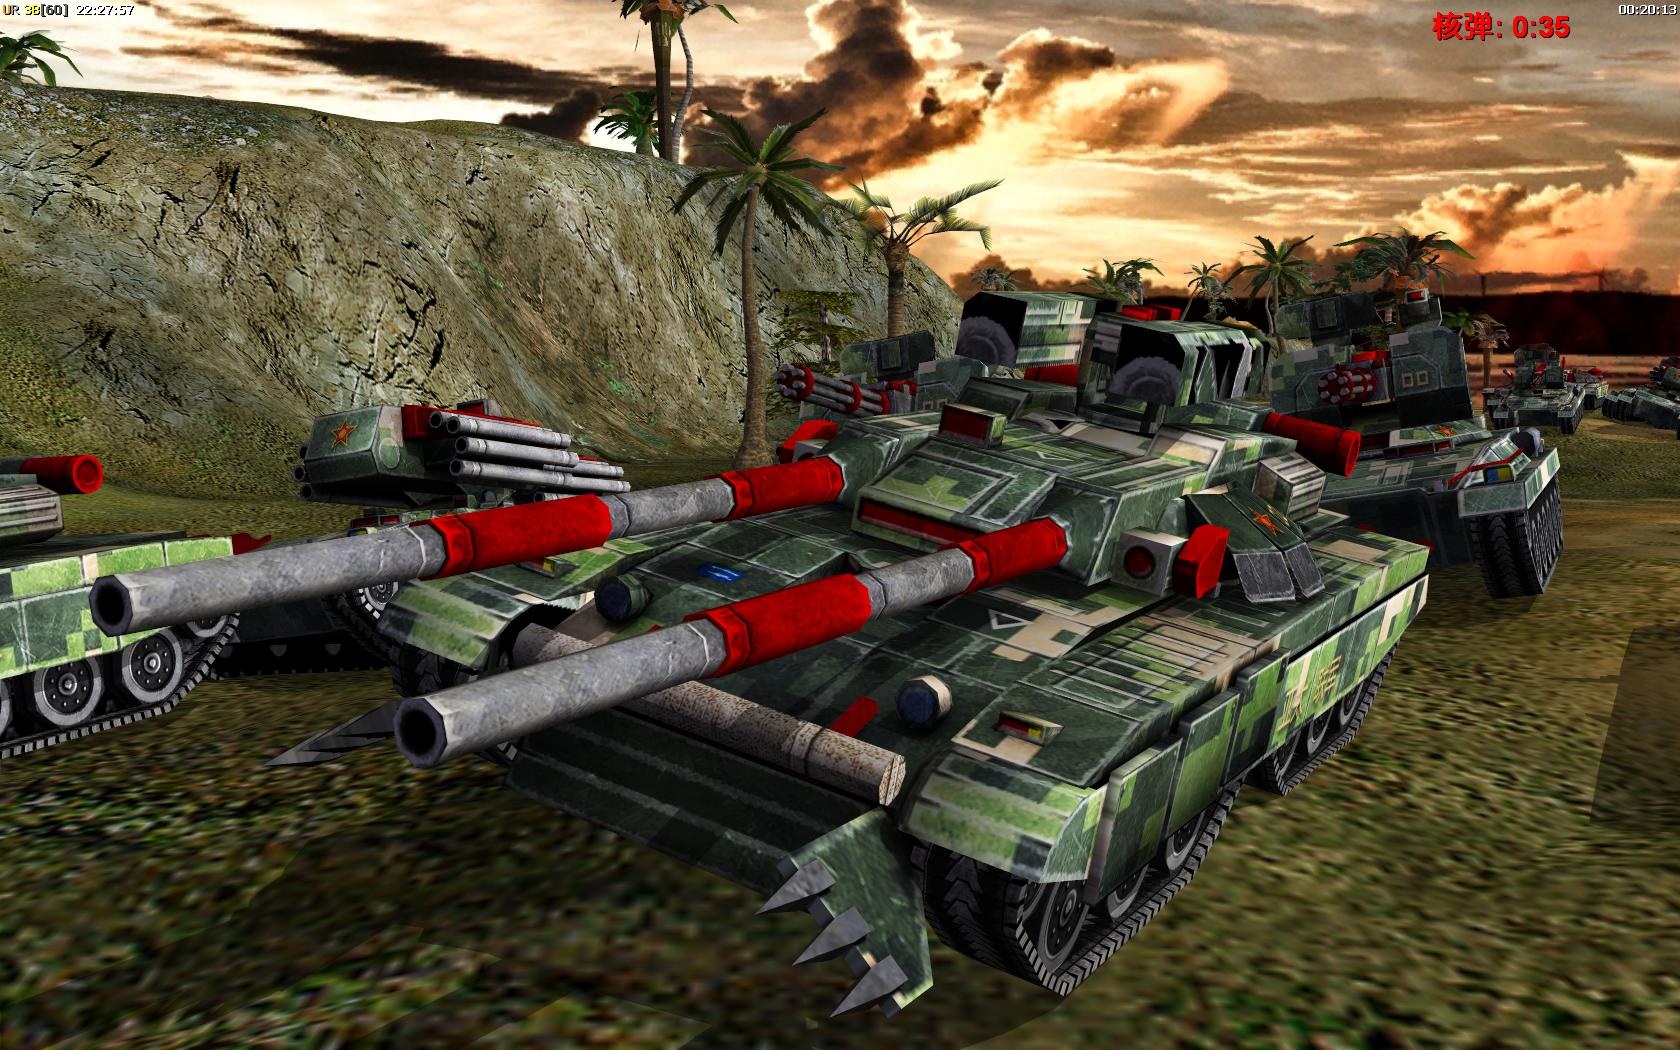 where can i buy command and conquer generals 2